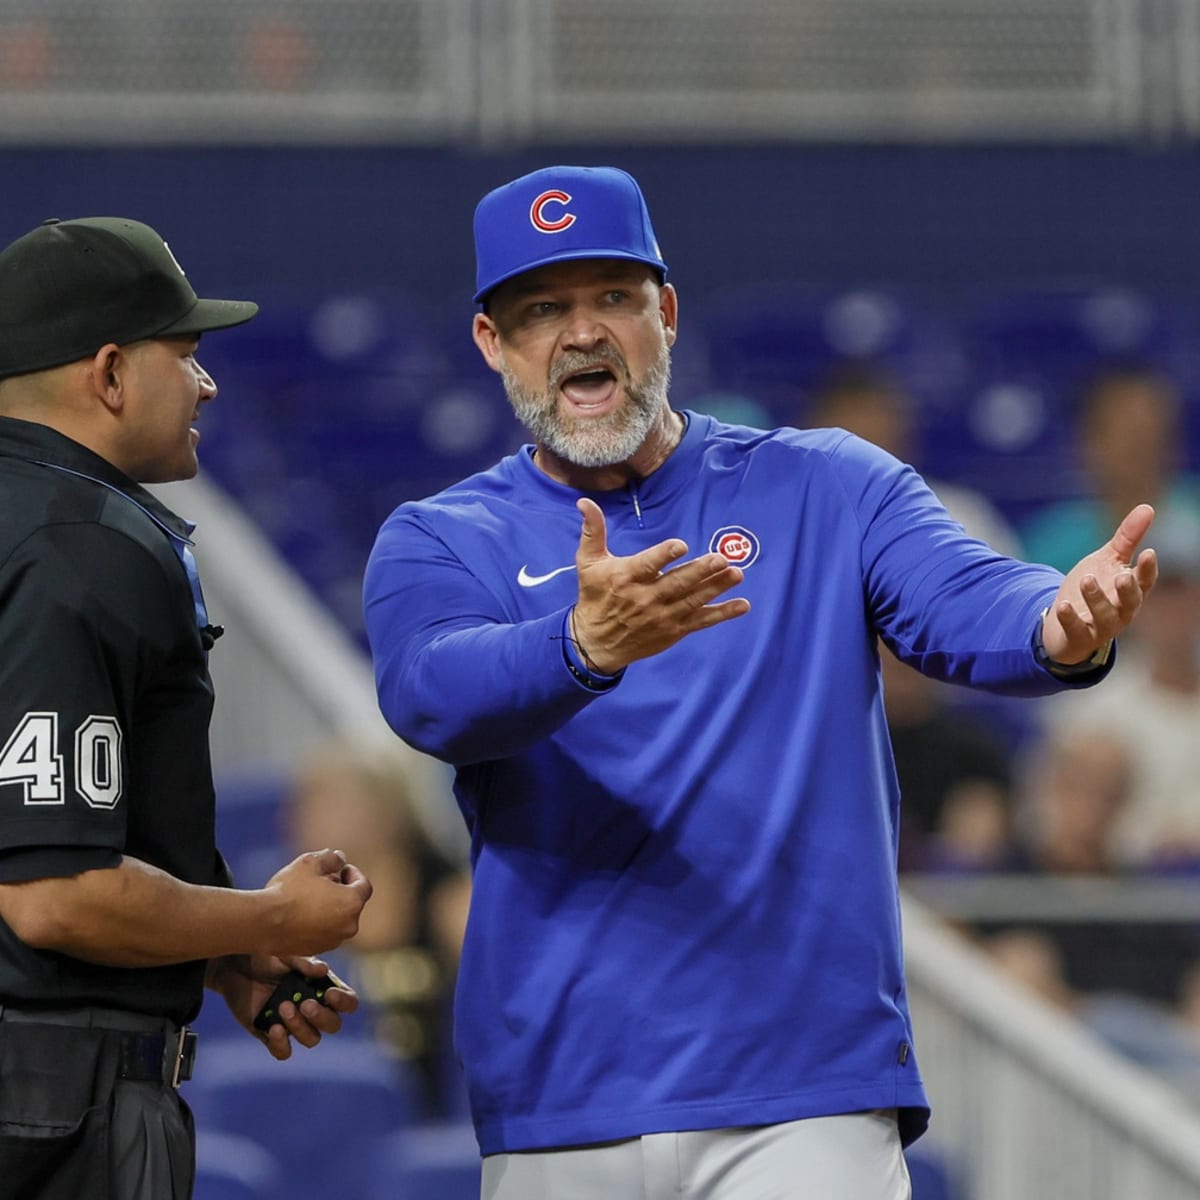 Cubs Reacts survey results: David Ross' managing is middle of the